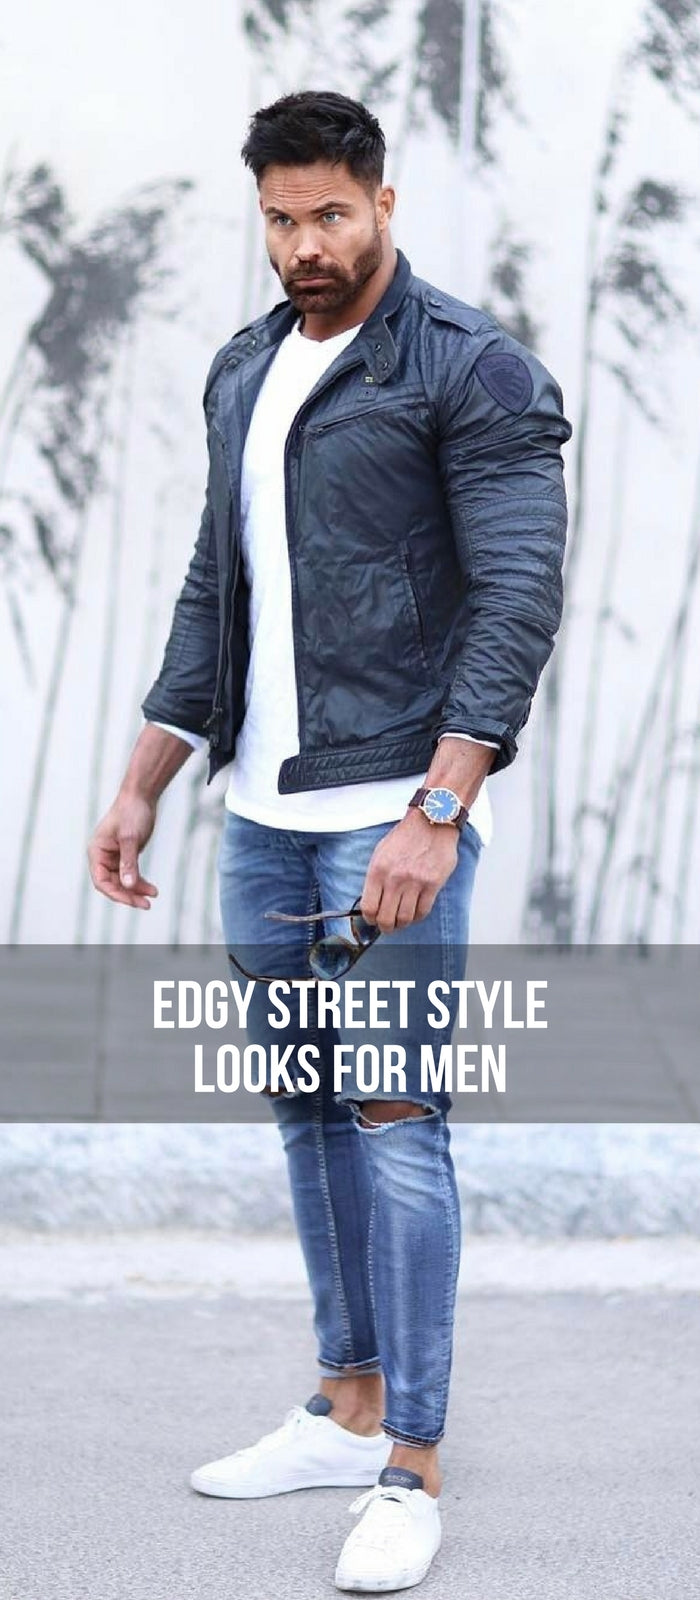 Edgy street style looks for men